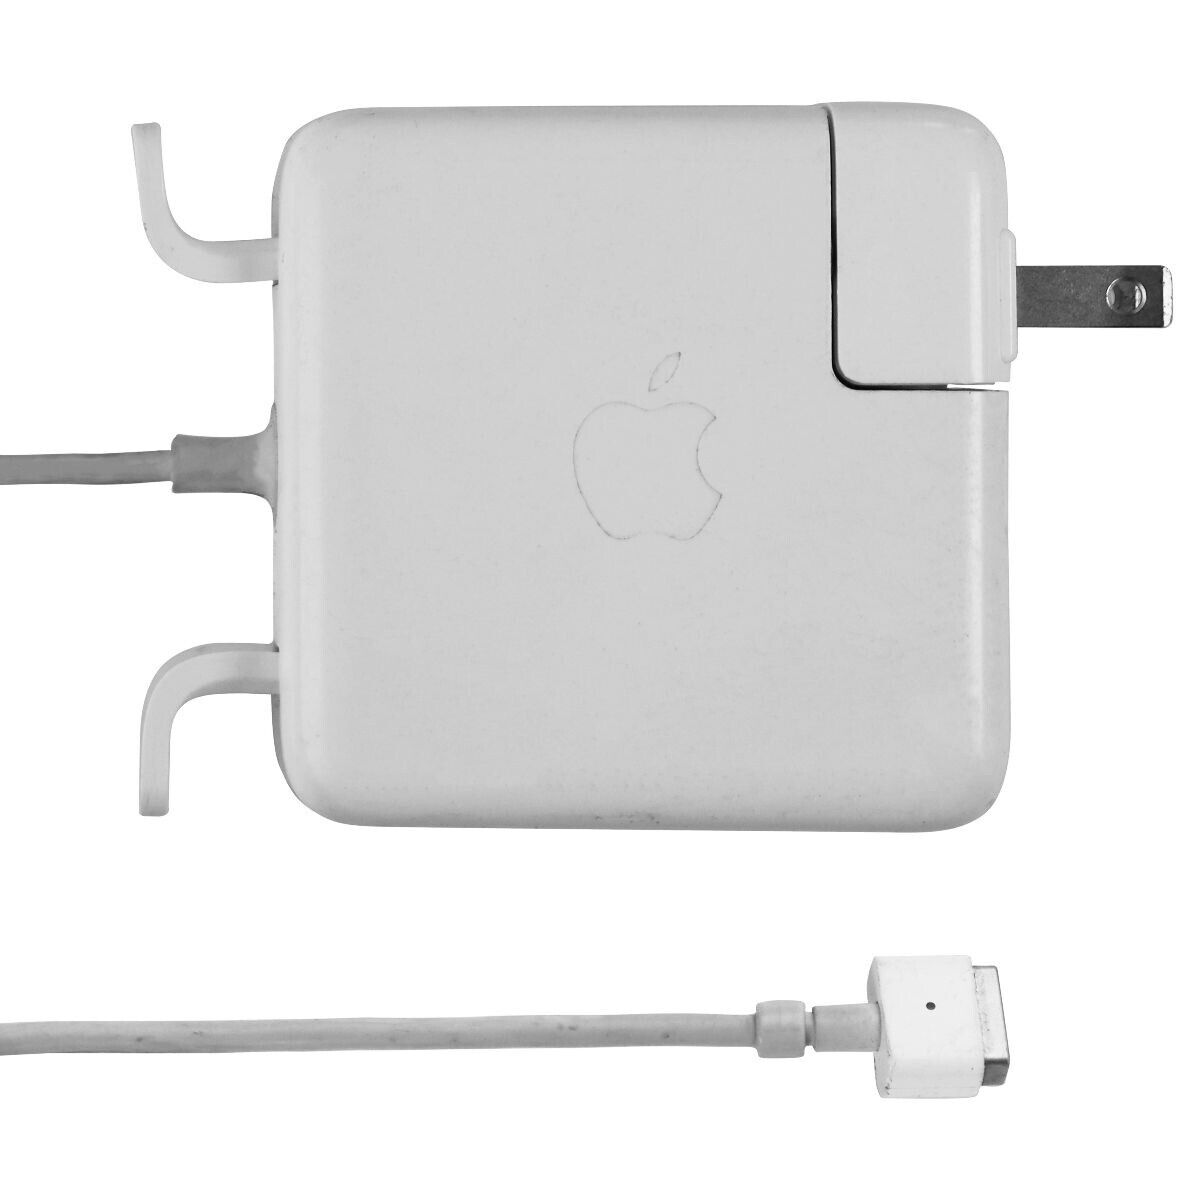 FAIR Apple 60W MagSafe Power Adapter - White (A1184, Old Model) - Folding Plug